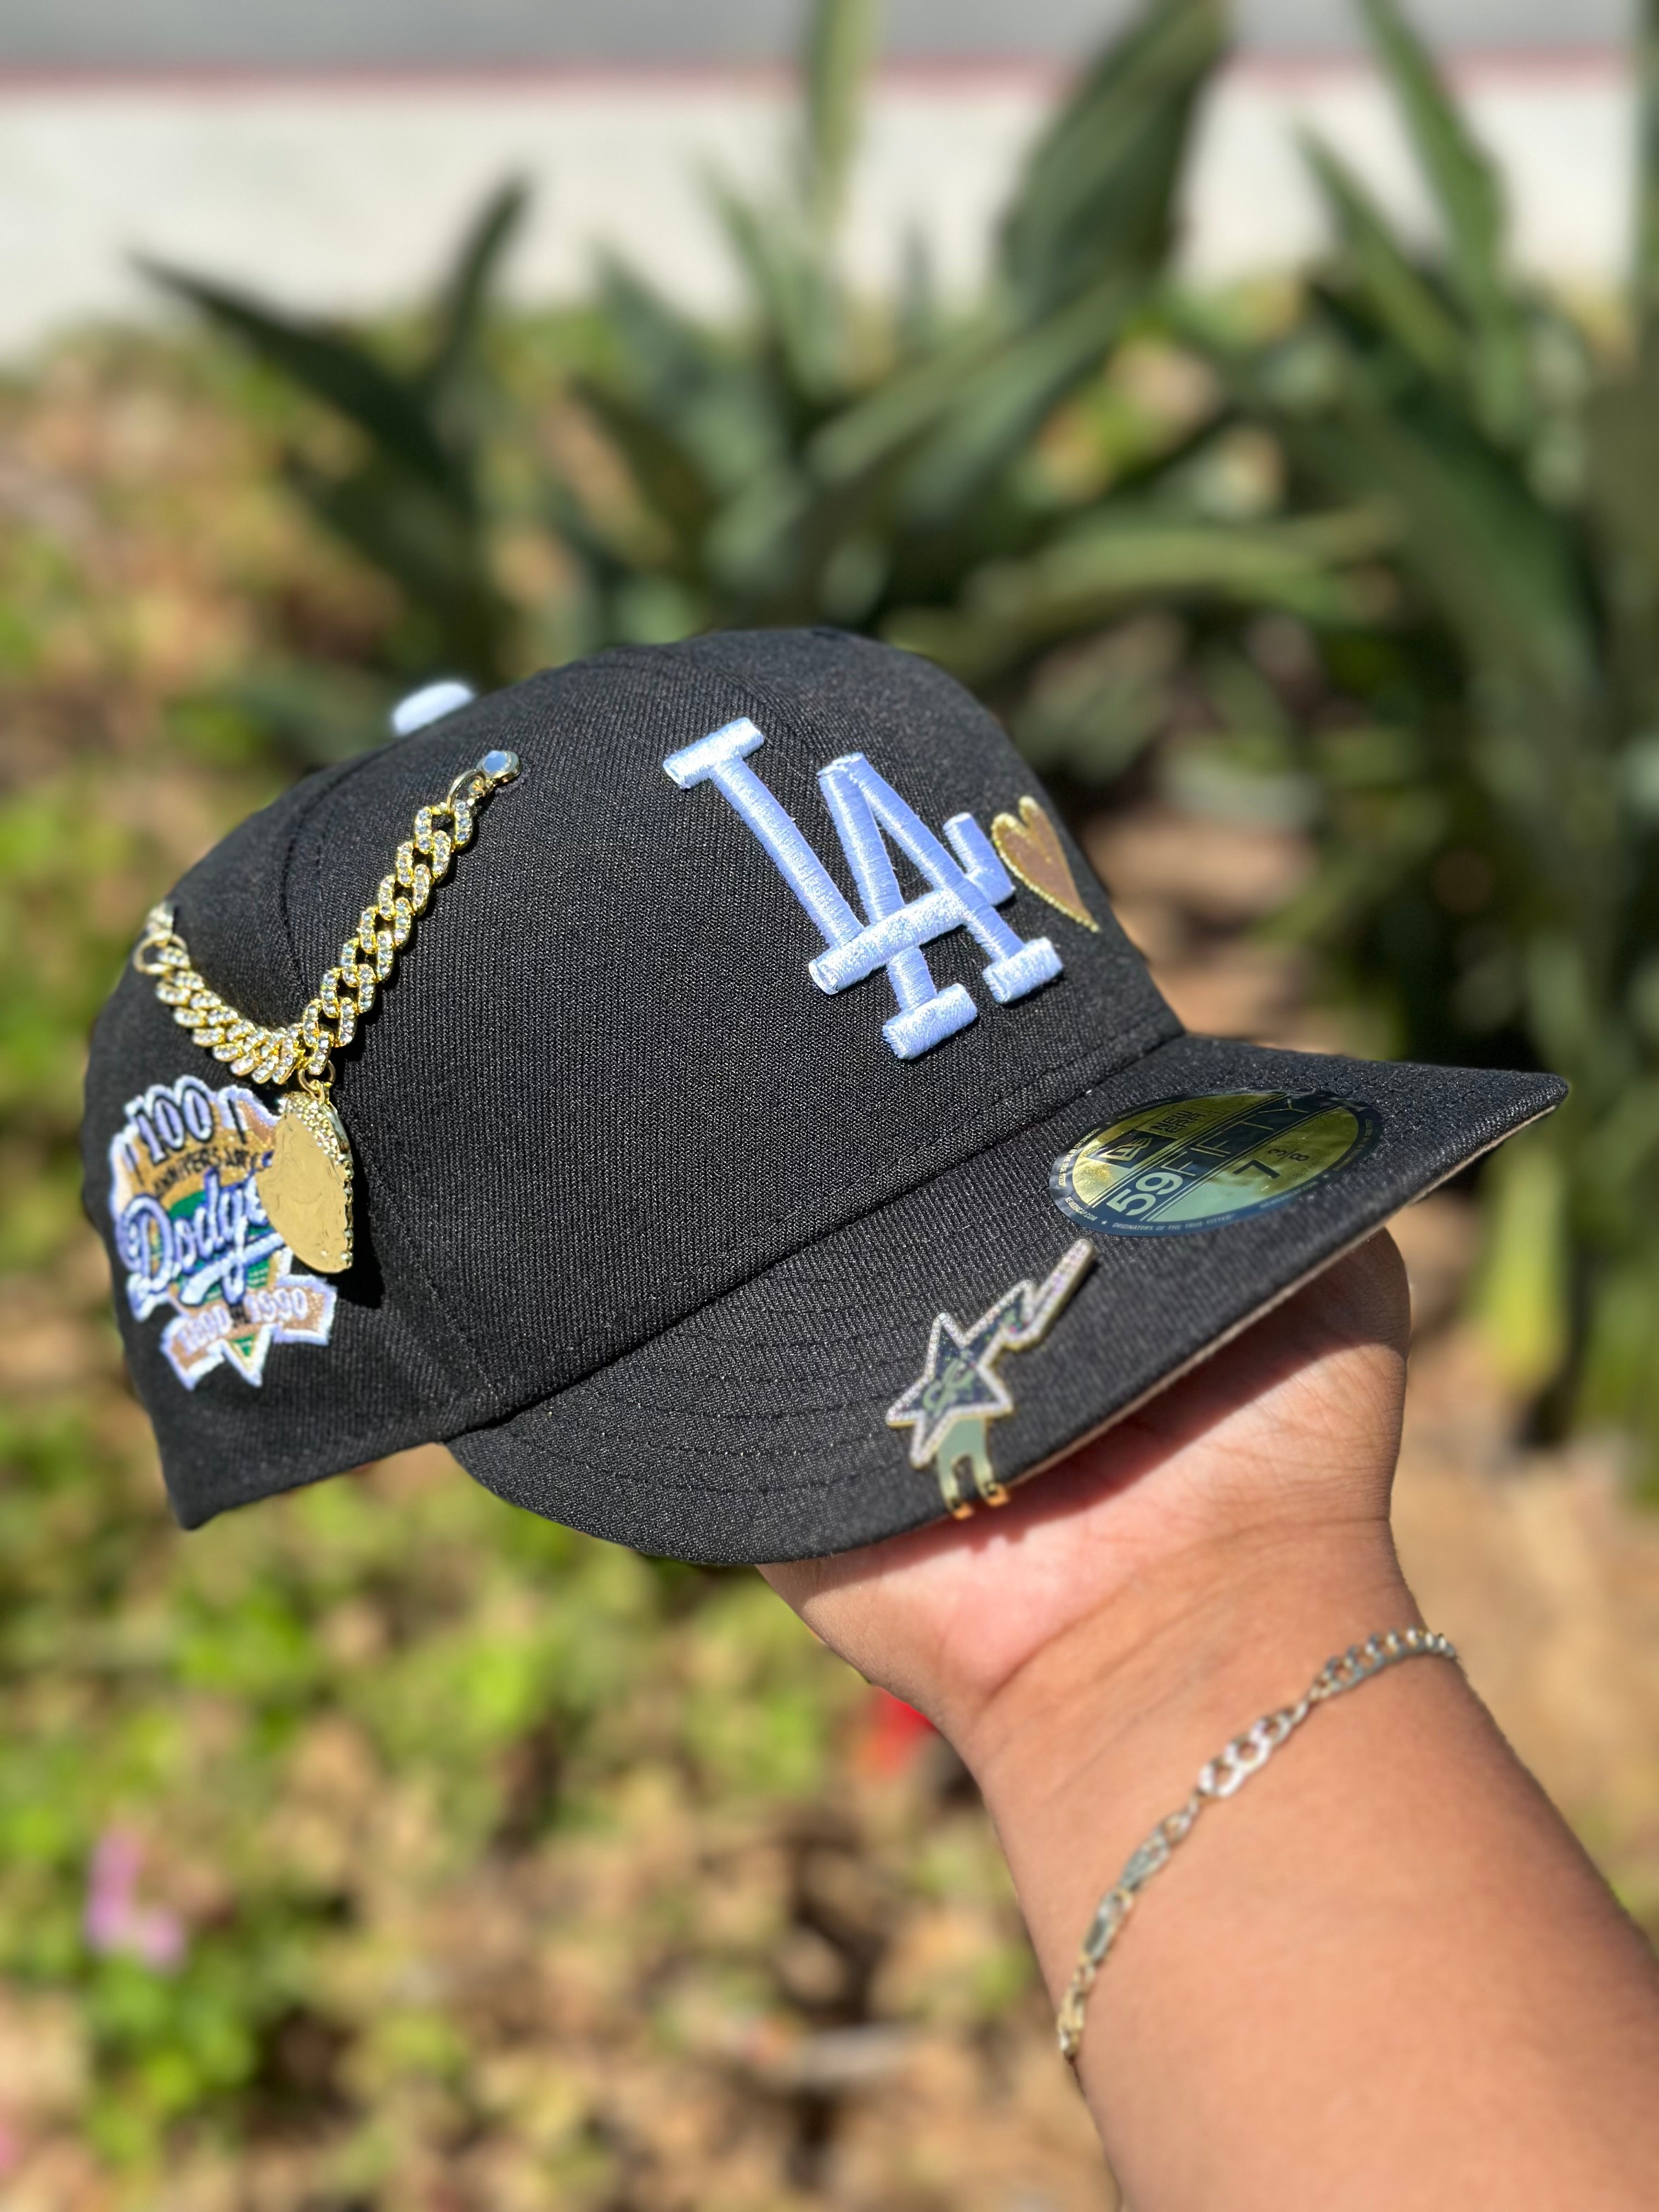 NEW ERA EXCLUSIVE 59FIFTY BLACK LOS ANGELES DODGERS W/ BROWN HEART + 100TH ANNIVERSARY SIDE PATCH